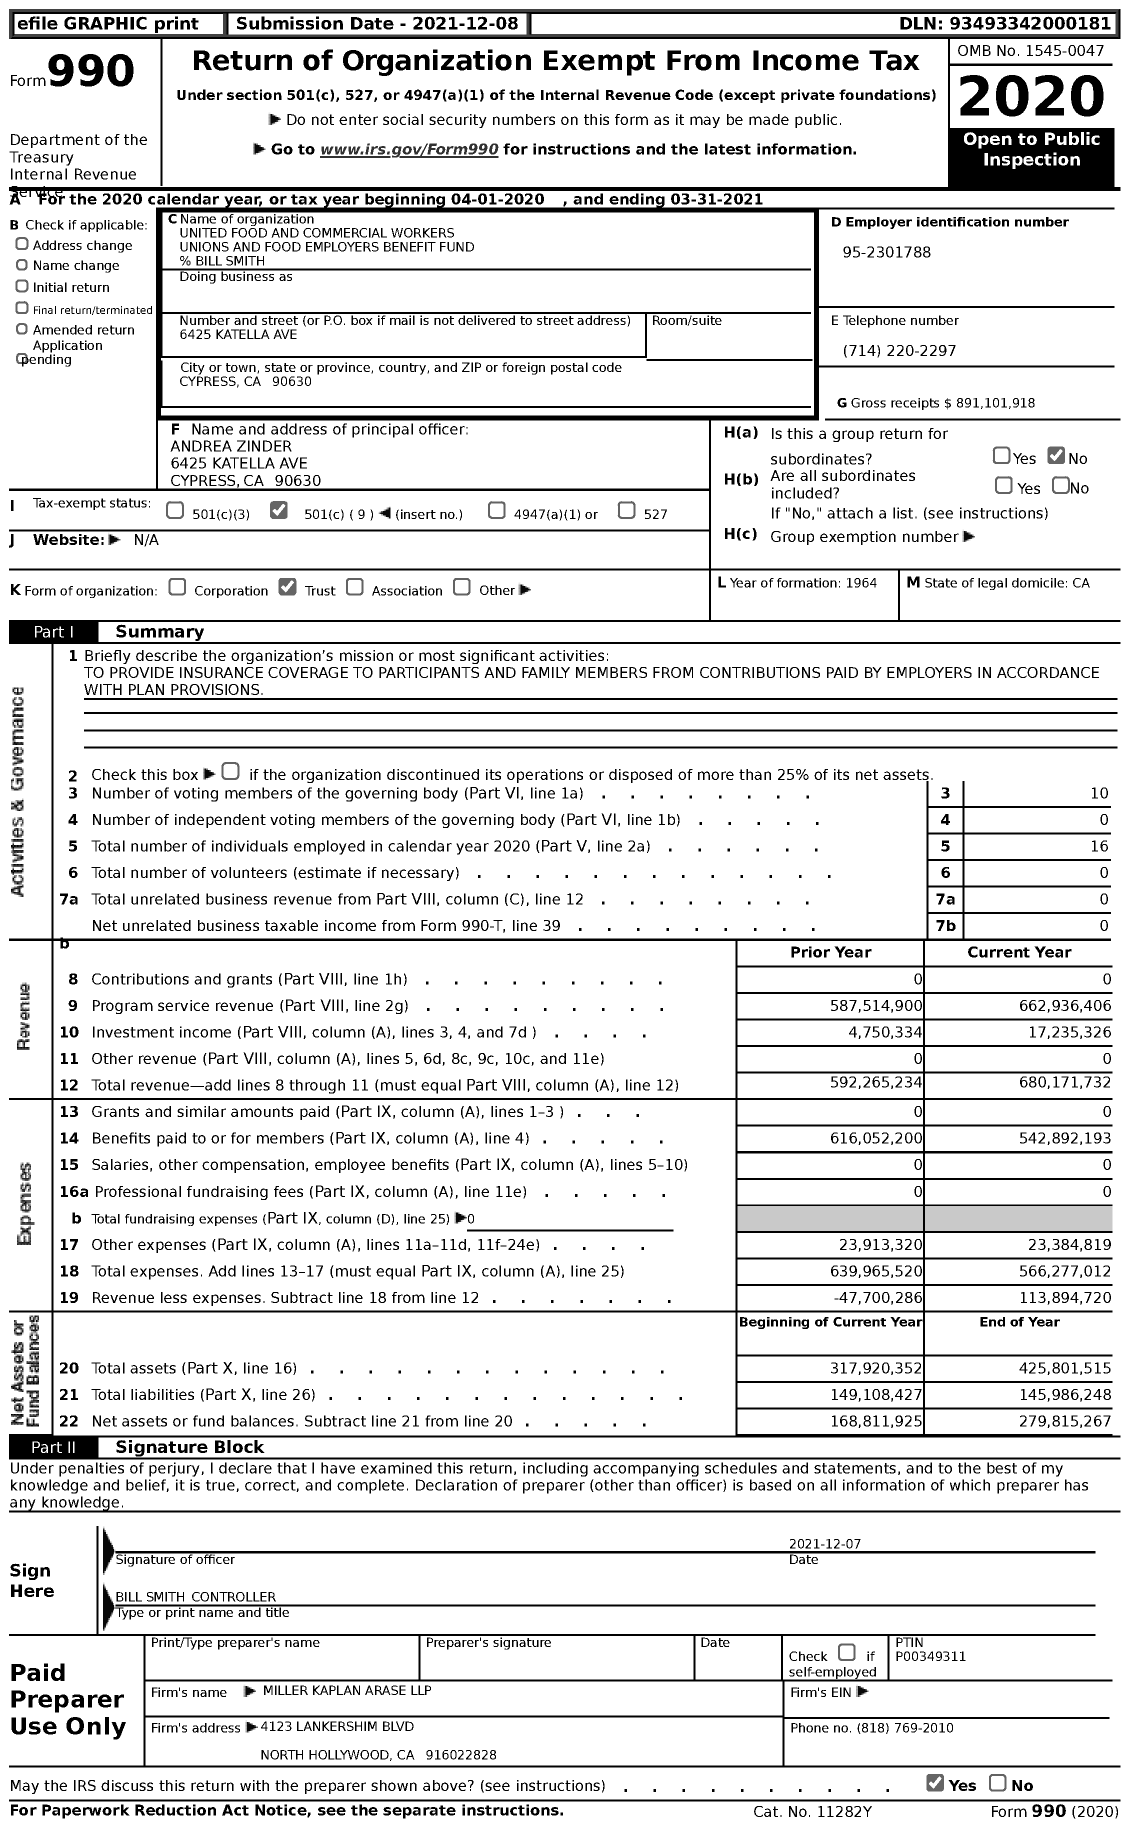 Image of first page of 2020 Form 990 for United Food and Commercial Workers Unions and Food Employers Benefit Fund